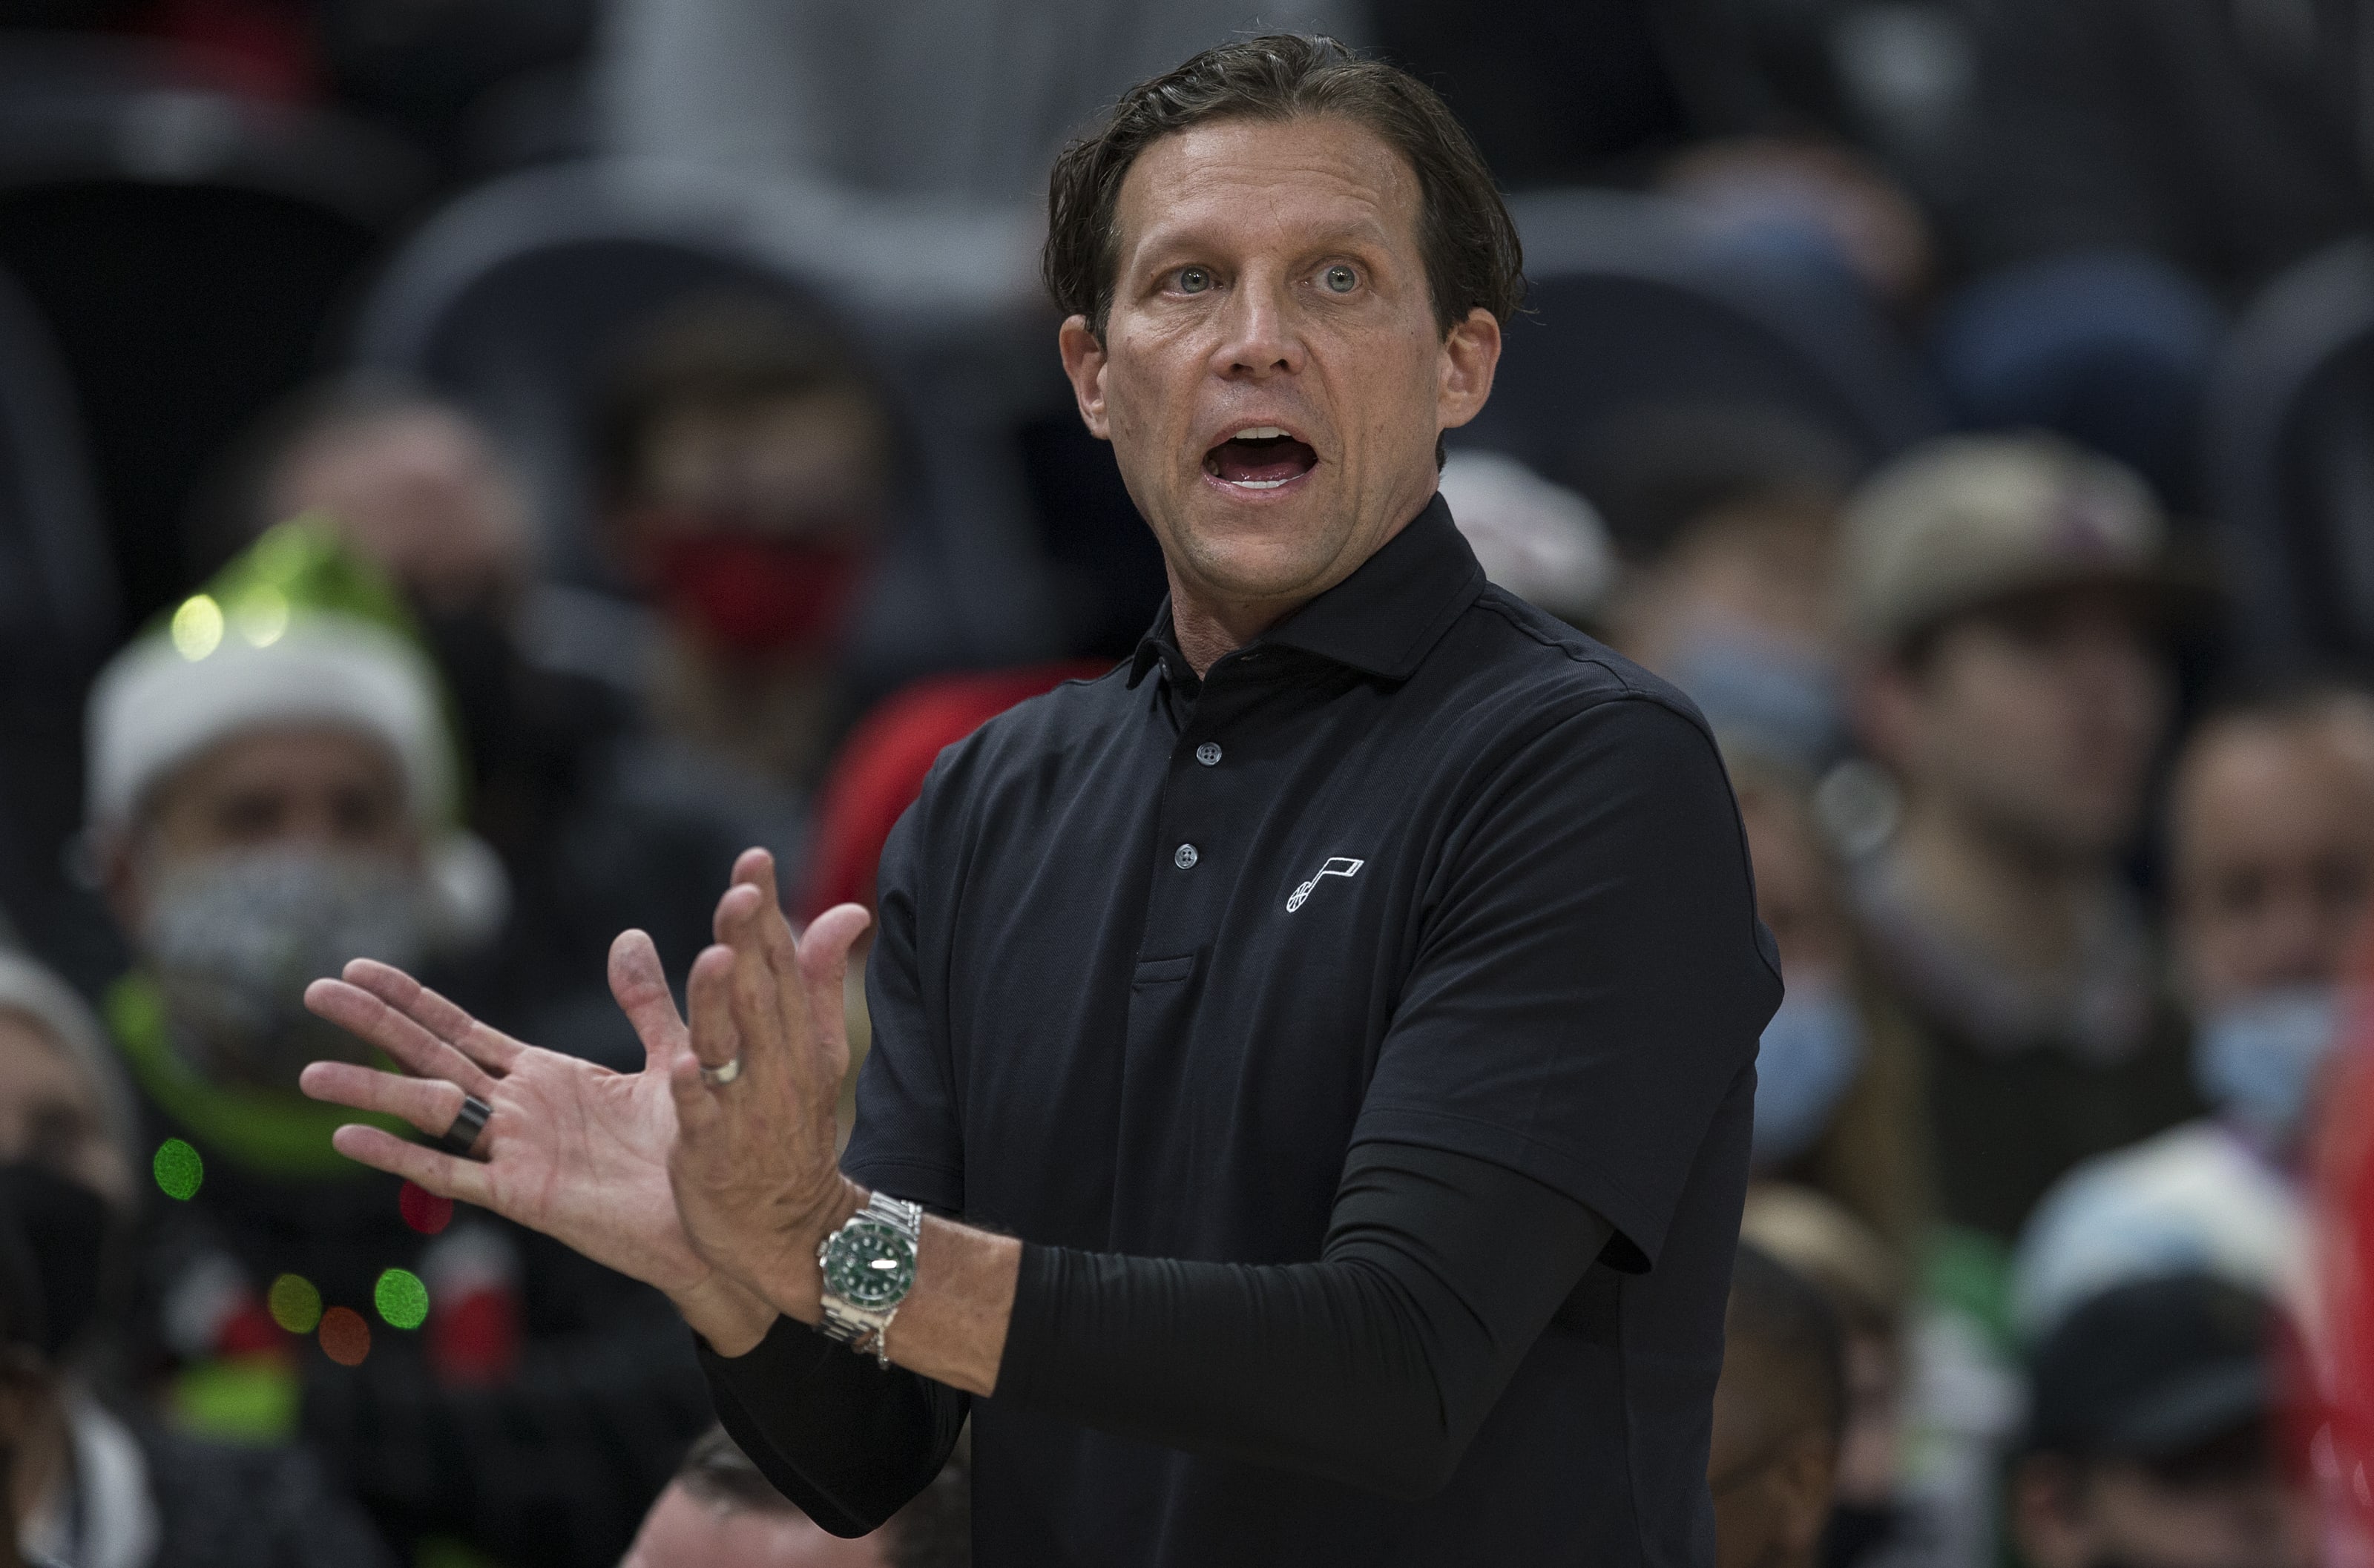 NBA Rumors, Quin Snyder, Los Angeles Lakers